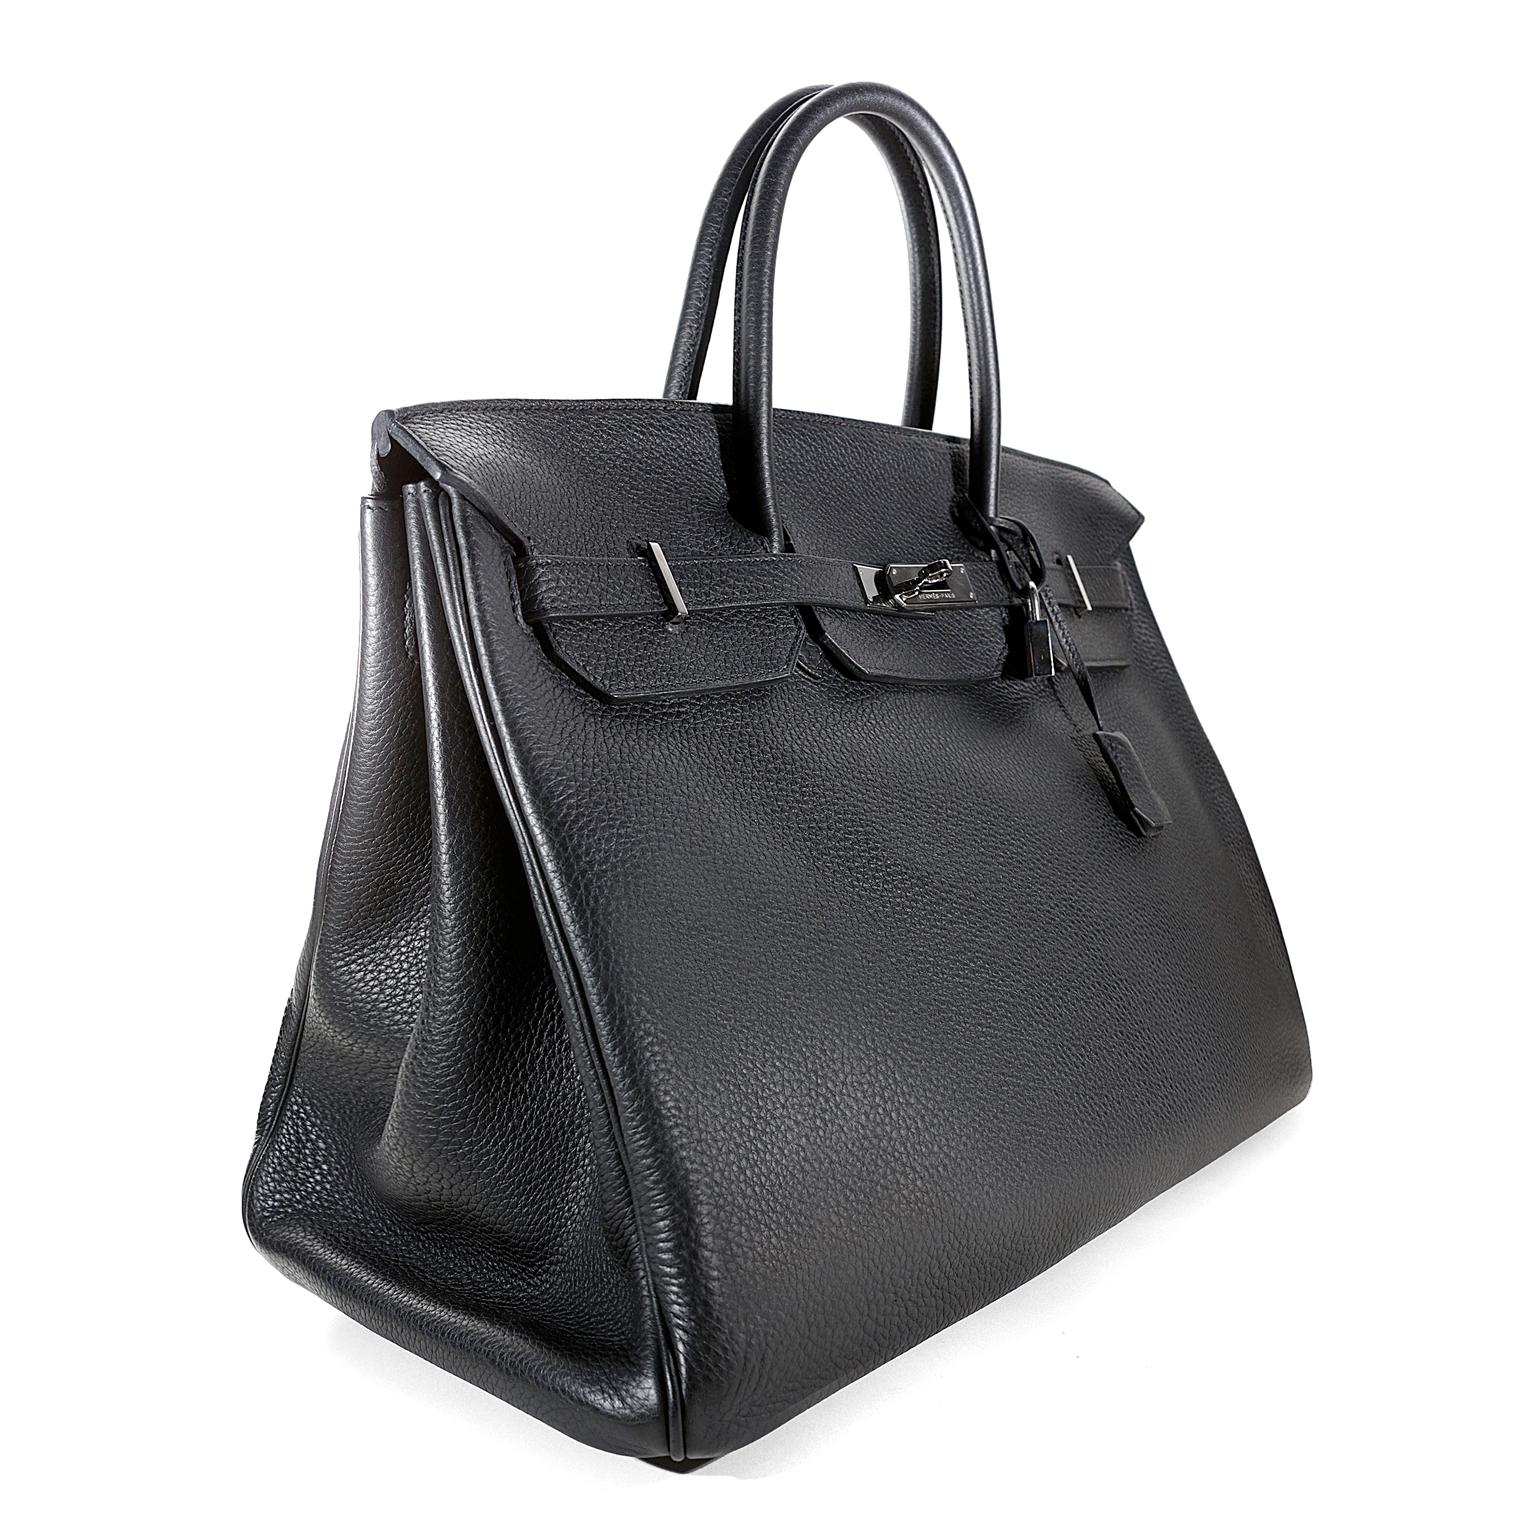 Hermès Noir Togo 40 cm Birkin- Excellent Plus Condition
Hand stitched by skilled craftsmen, wait lists of a year or more are common for the Hermès Birkin. Classic Black is perfectly paired with polished Palladium hardware in this must have Birkin.  